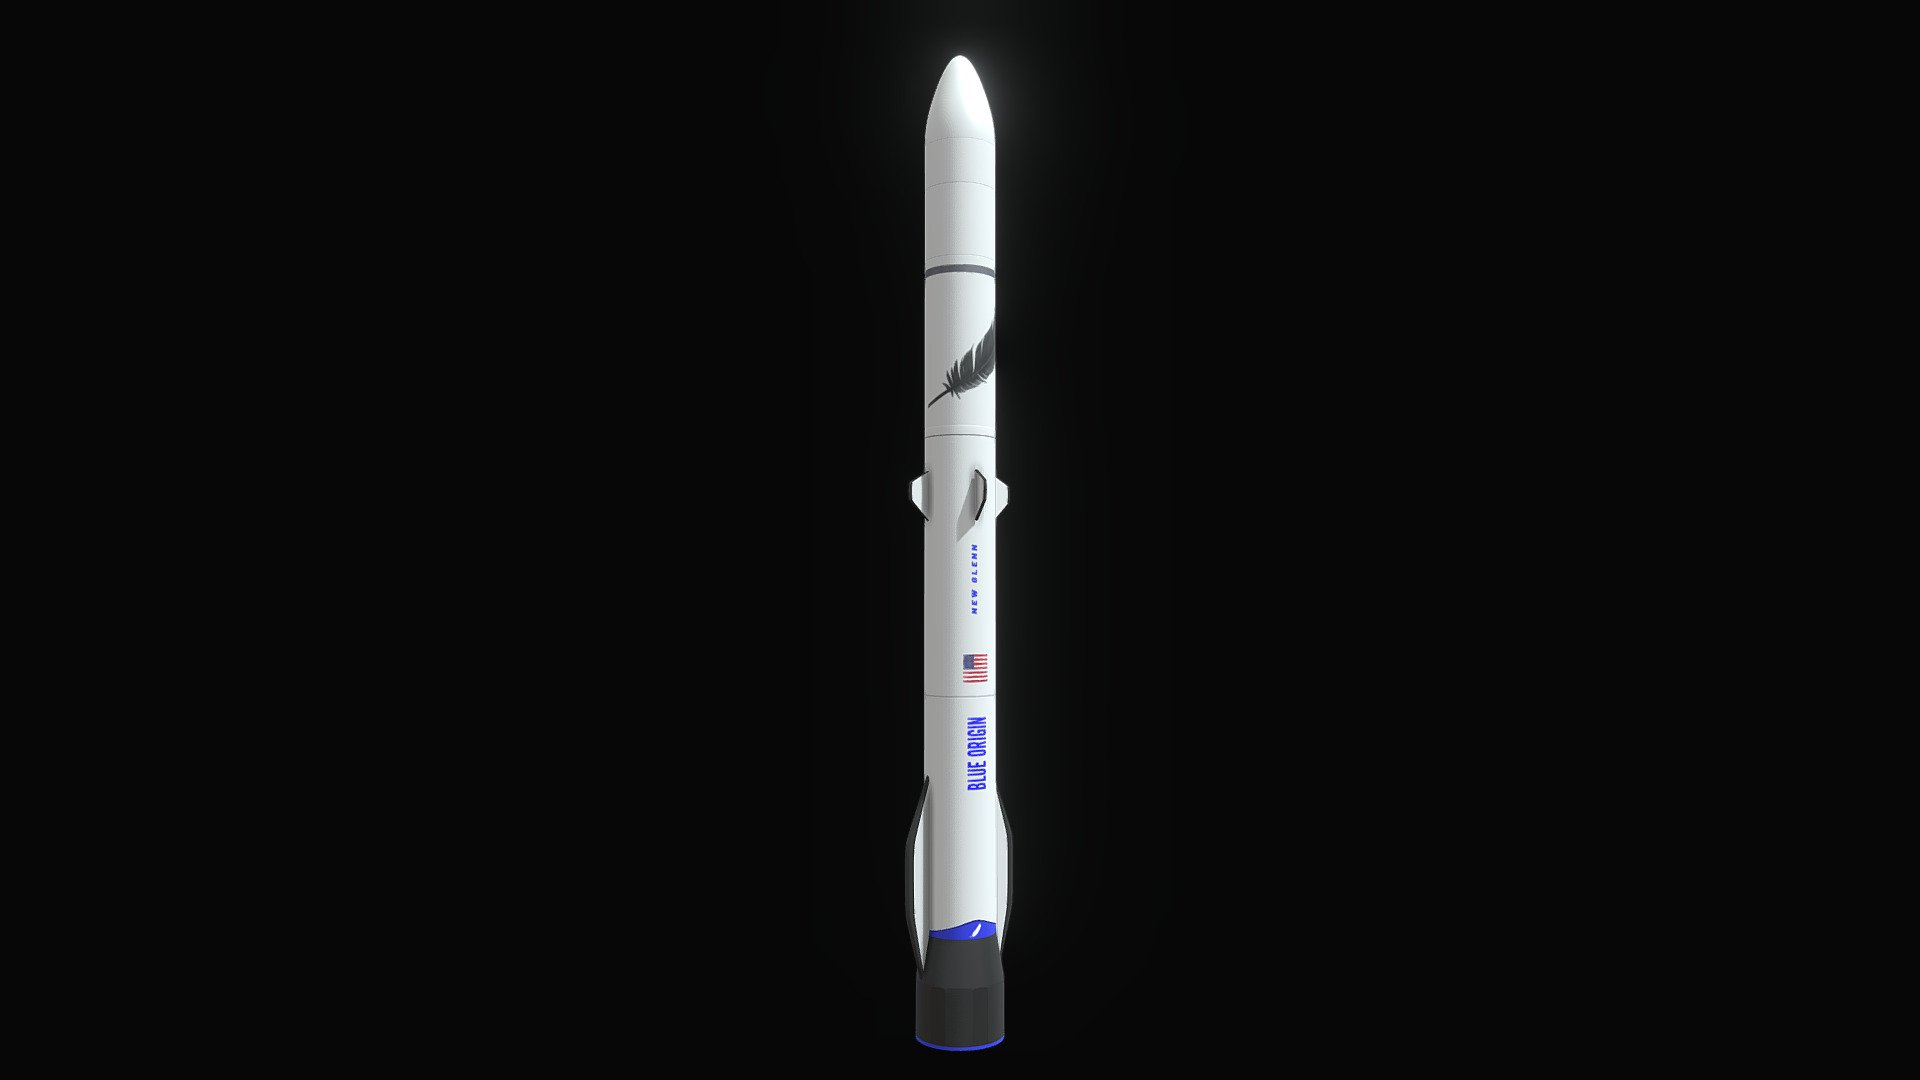 New Glenn is a heavy-lift orbital launch vehicle in development by Blue Origin, named after NASA astronaut John Glenn, the first American astronaut to orbit Earth. The FBX model includes 8k resolution textures 3d model